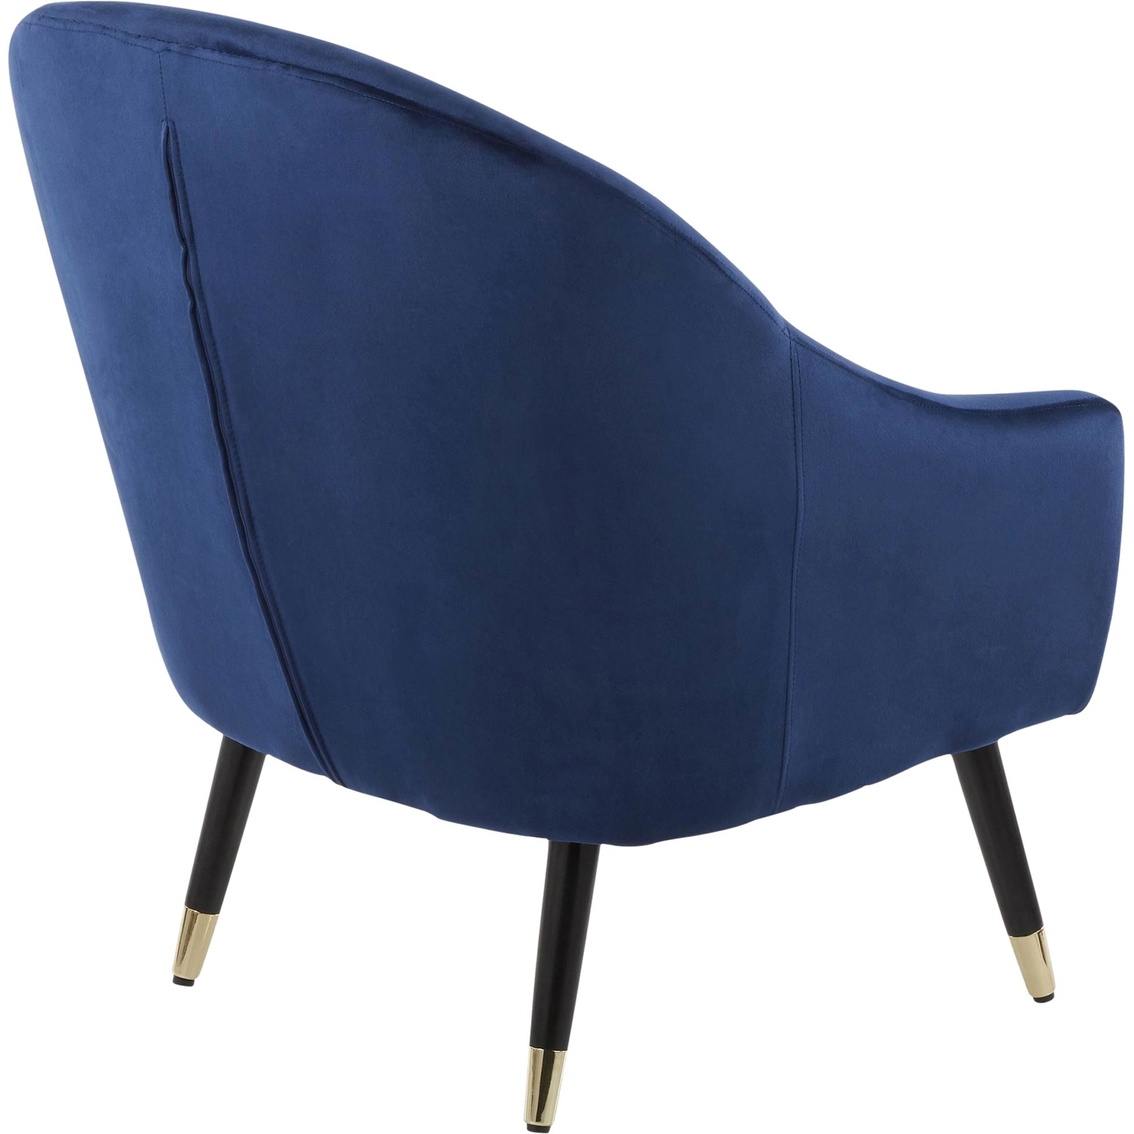 LumiSource Matisse Accent Chair - Image 4 of 6